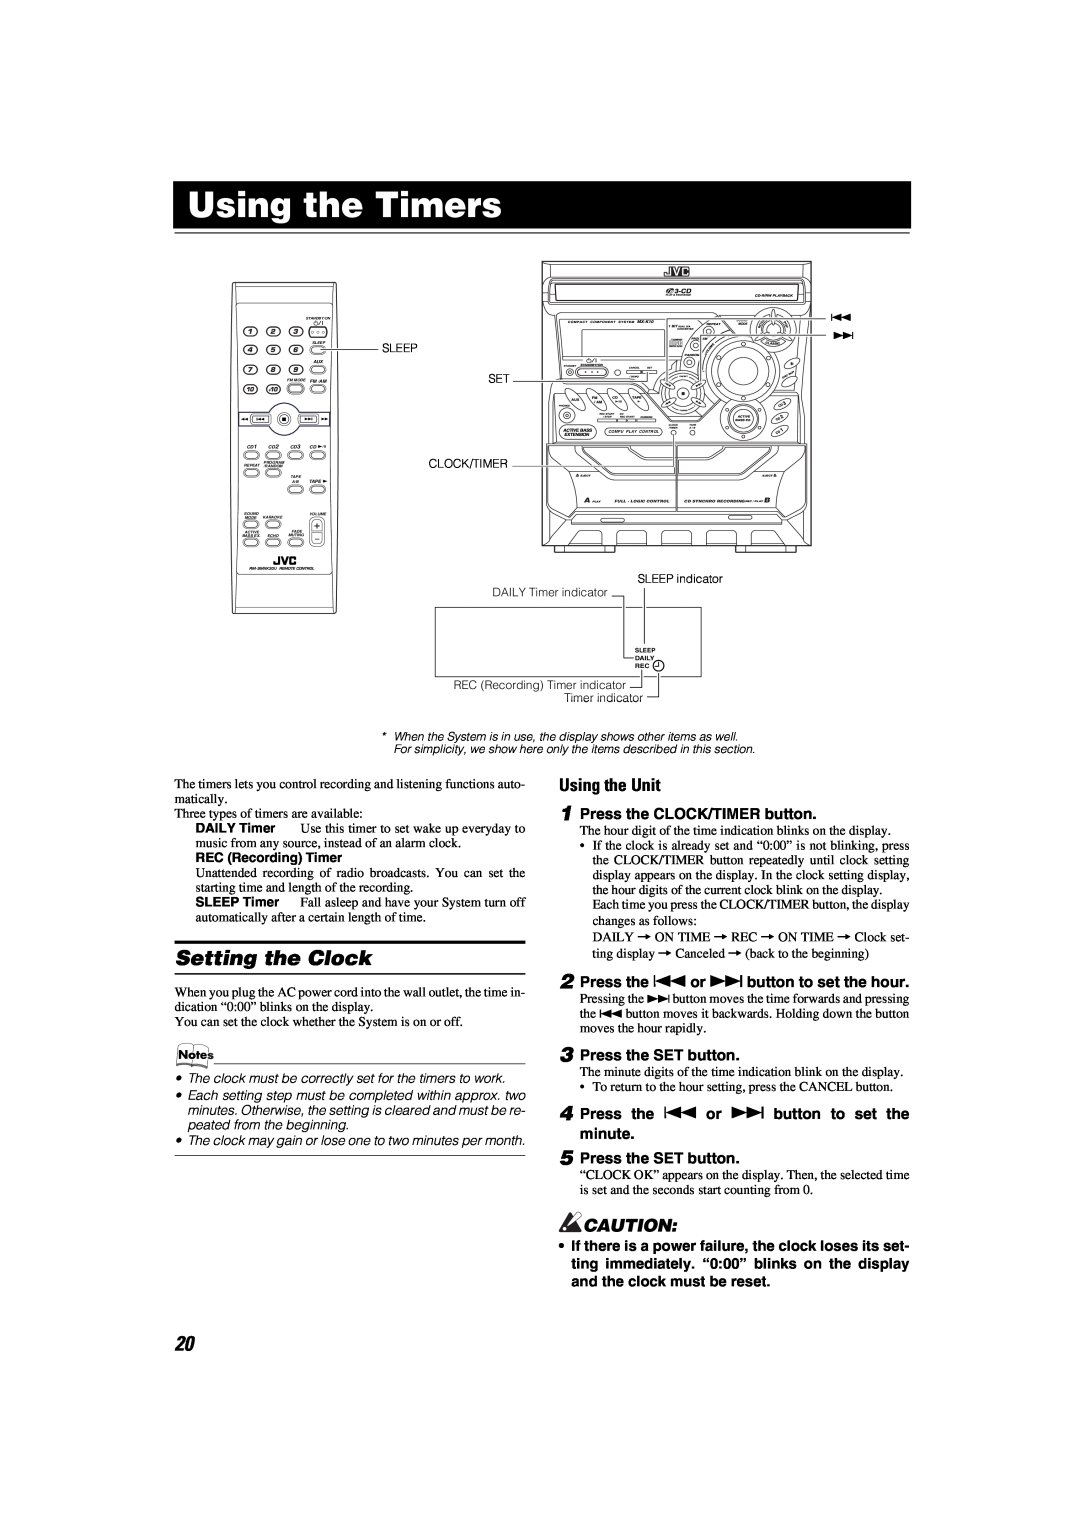 JVC manual Using the Timers, COMPACTCOMPONENTSYSTEMMX-K10, Acivebass, Extension, Fm/Am, Standby/On 